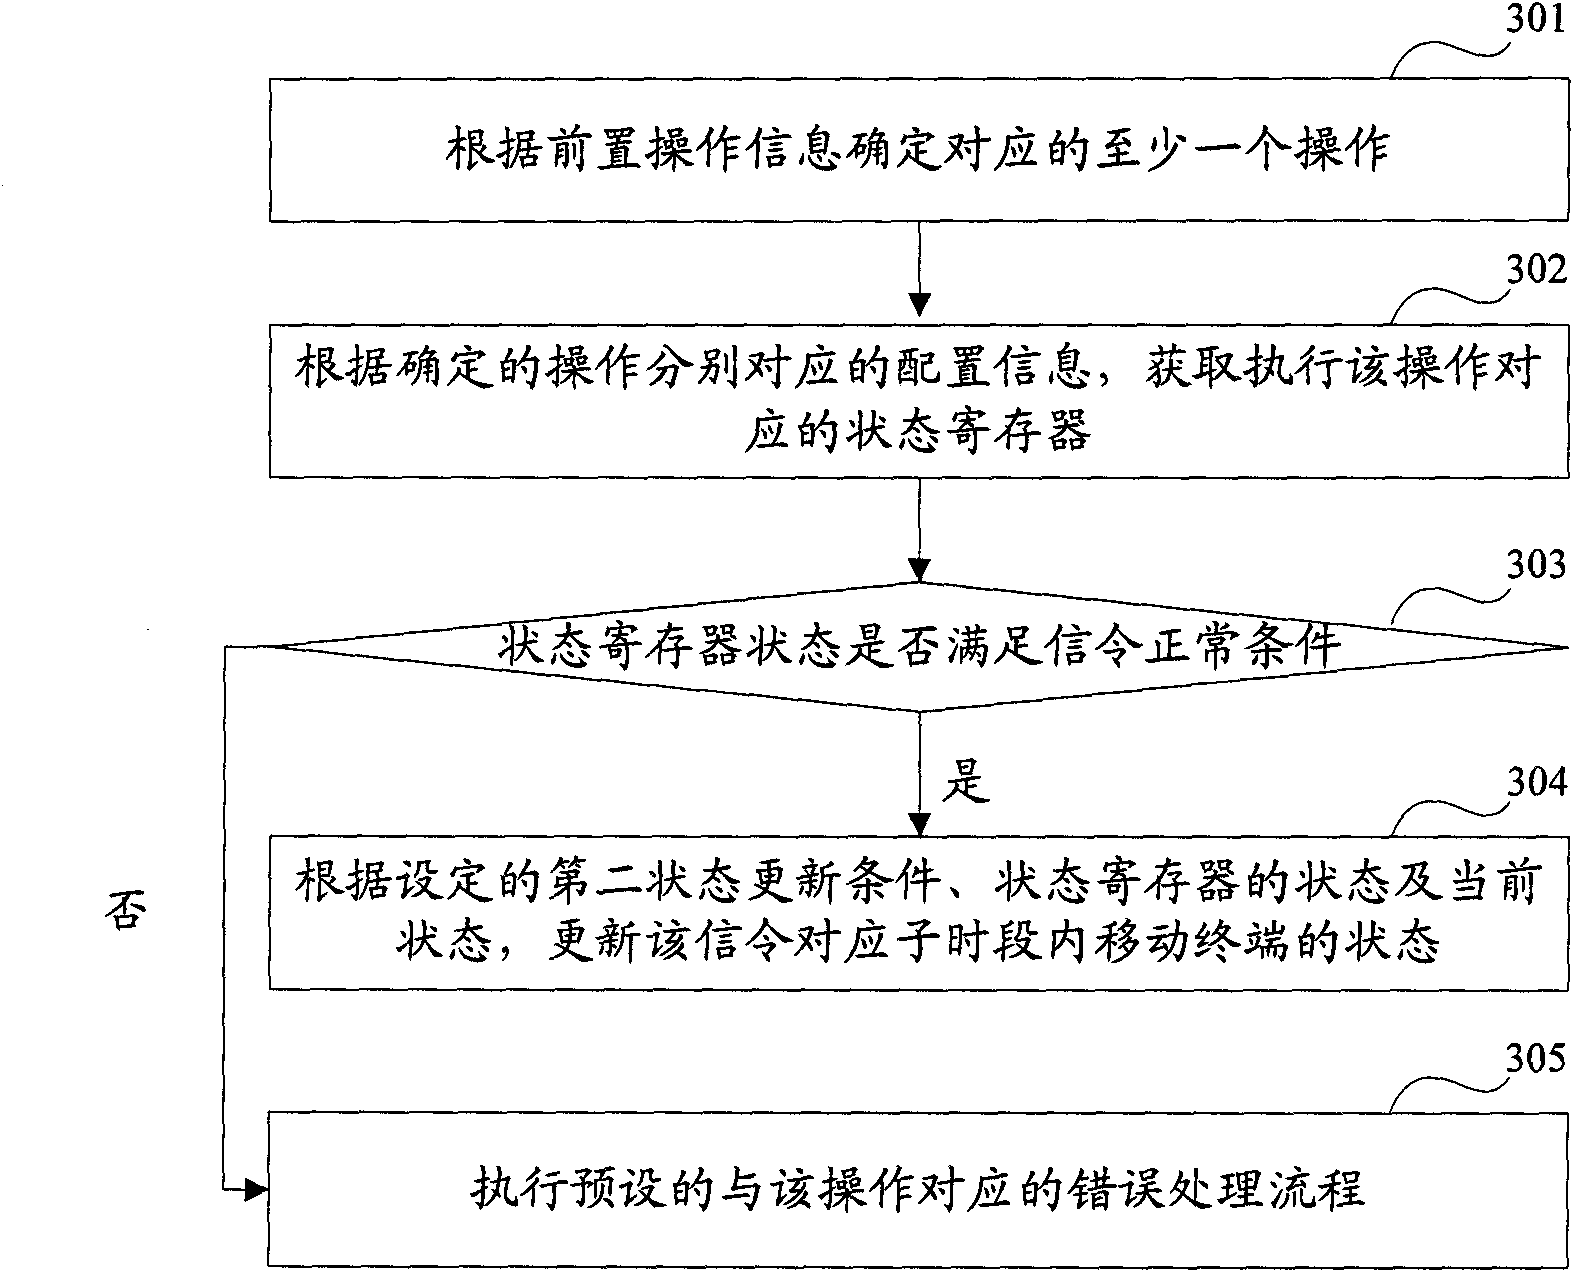 Method and device for determining network events in communication network